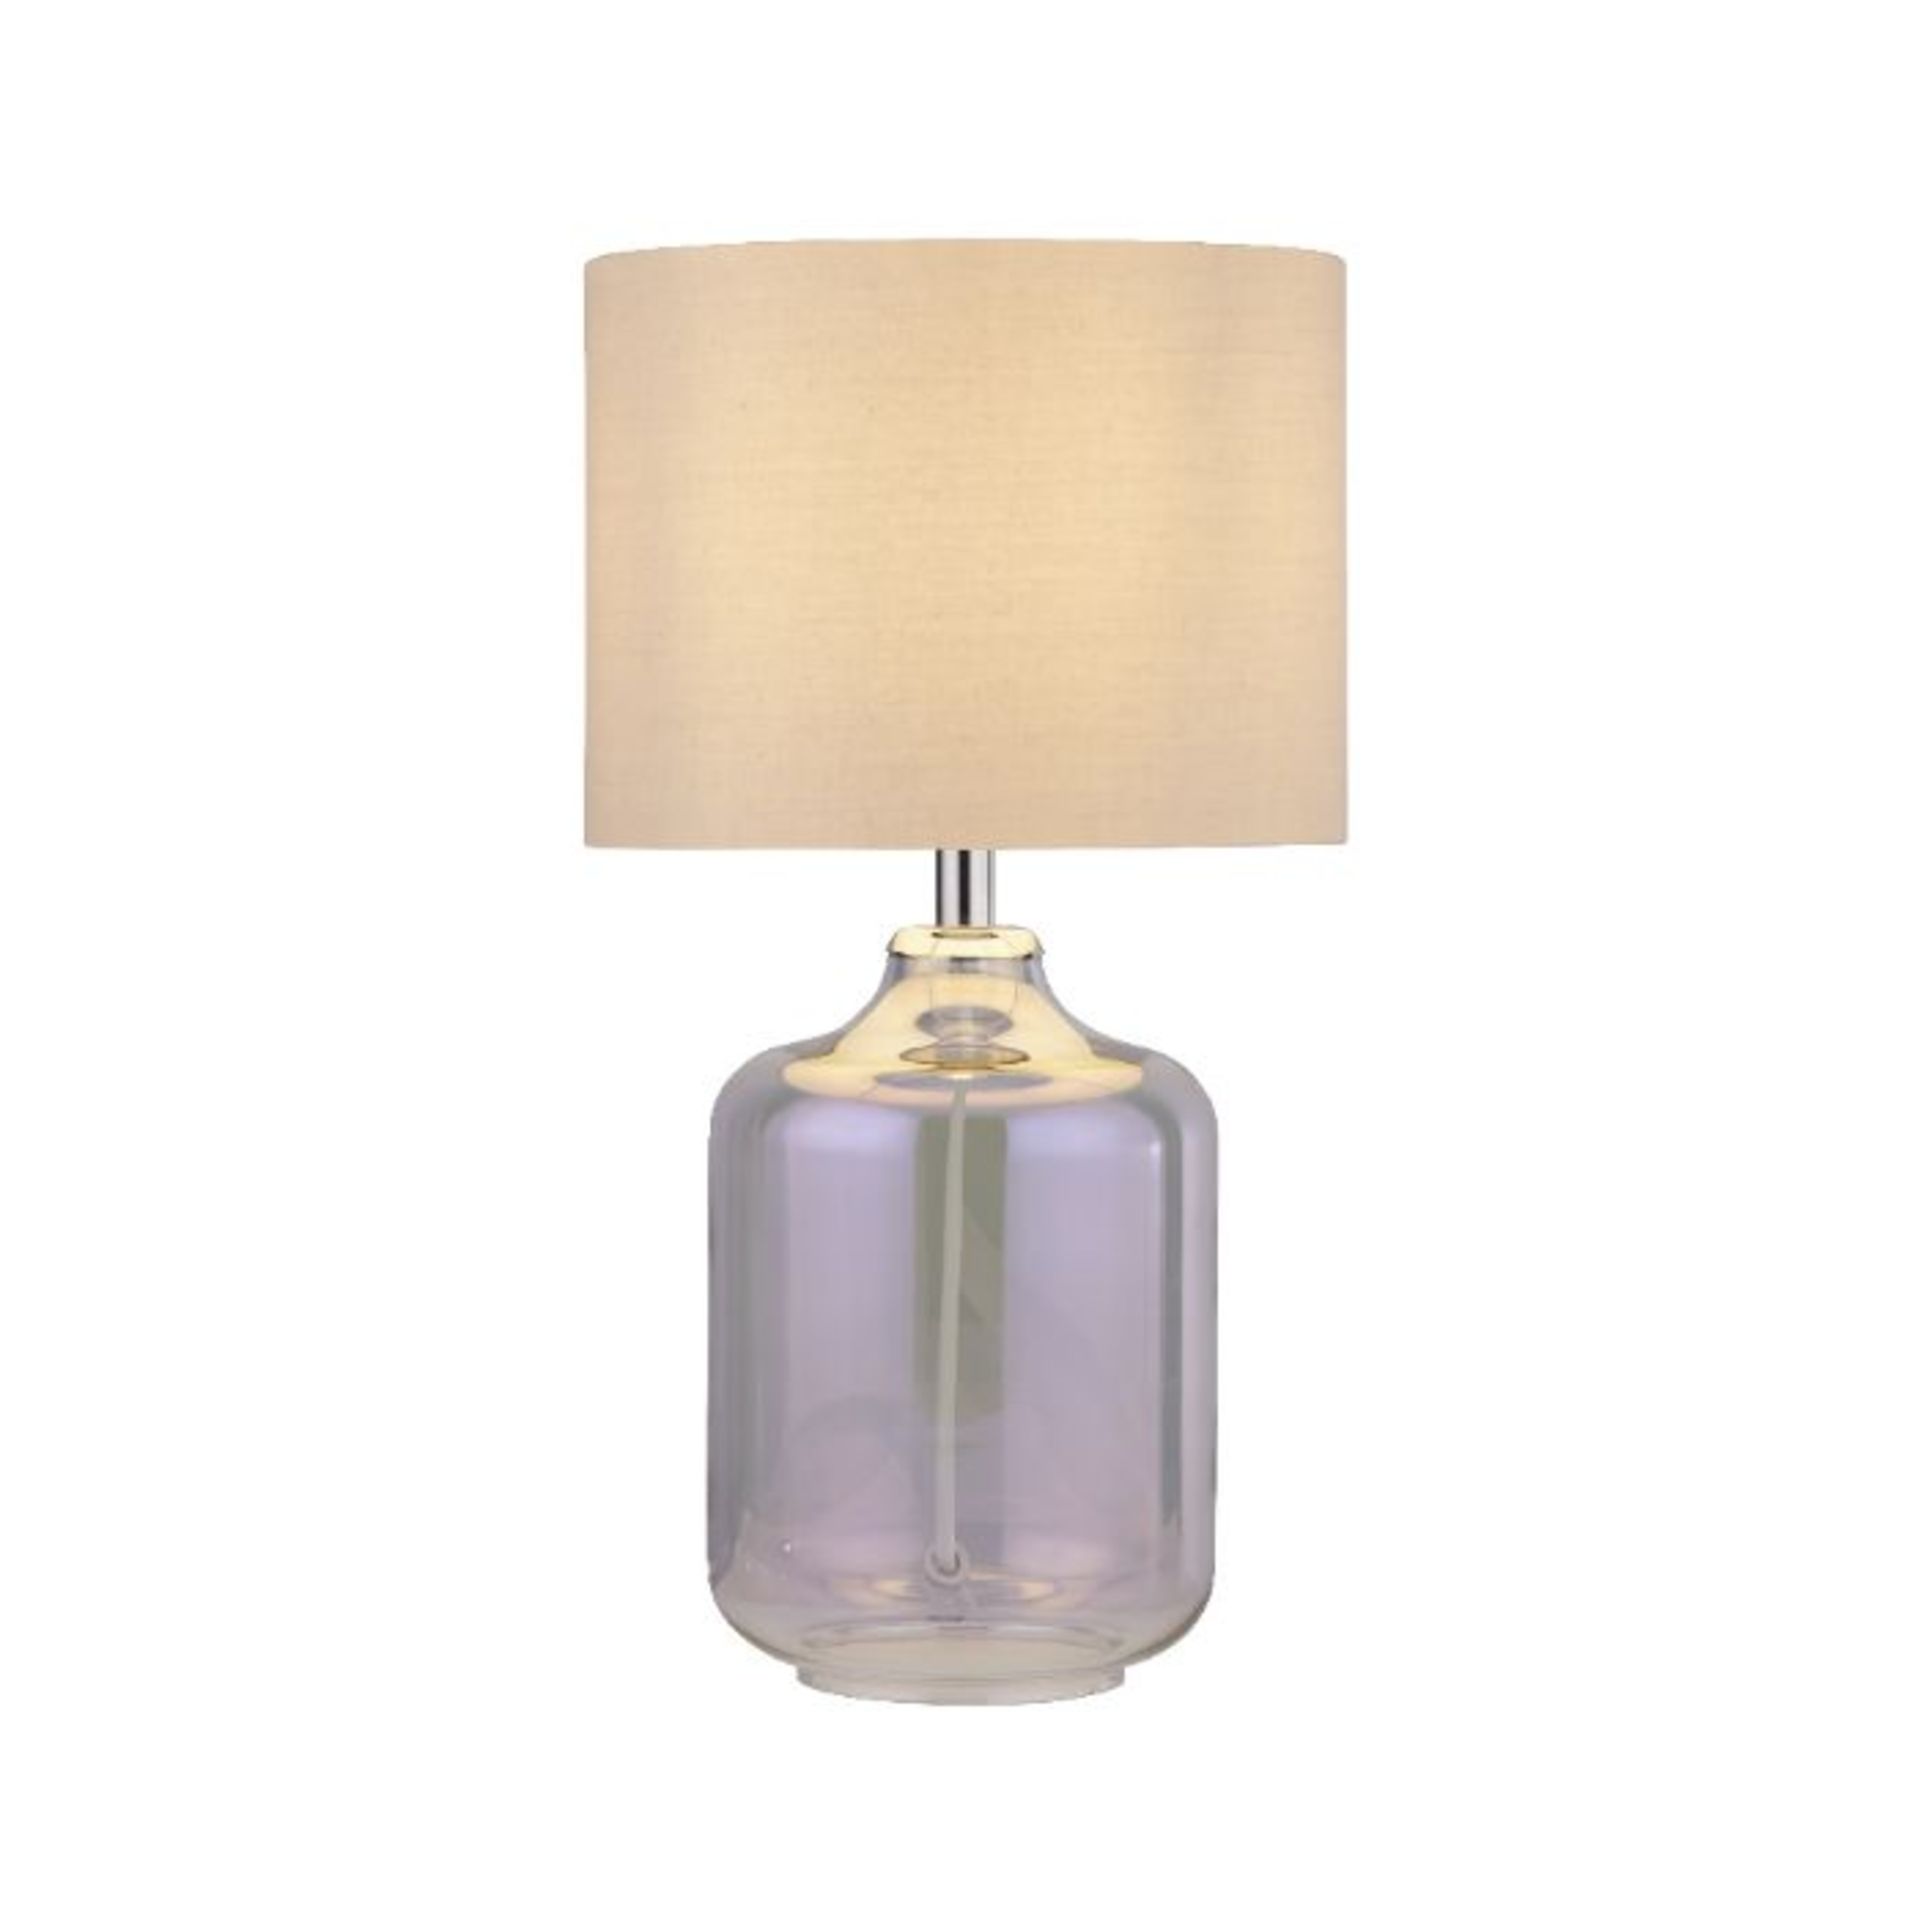 OPHELIA GLASS TABLE LAMP. CHROME, IRRIDESCENT AND BEIGE. 37CM HIGH. - Table lamp with iridescent